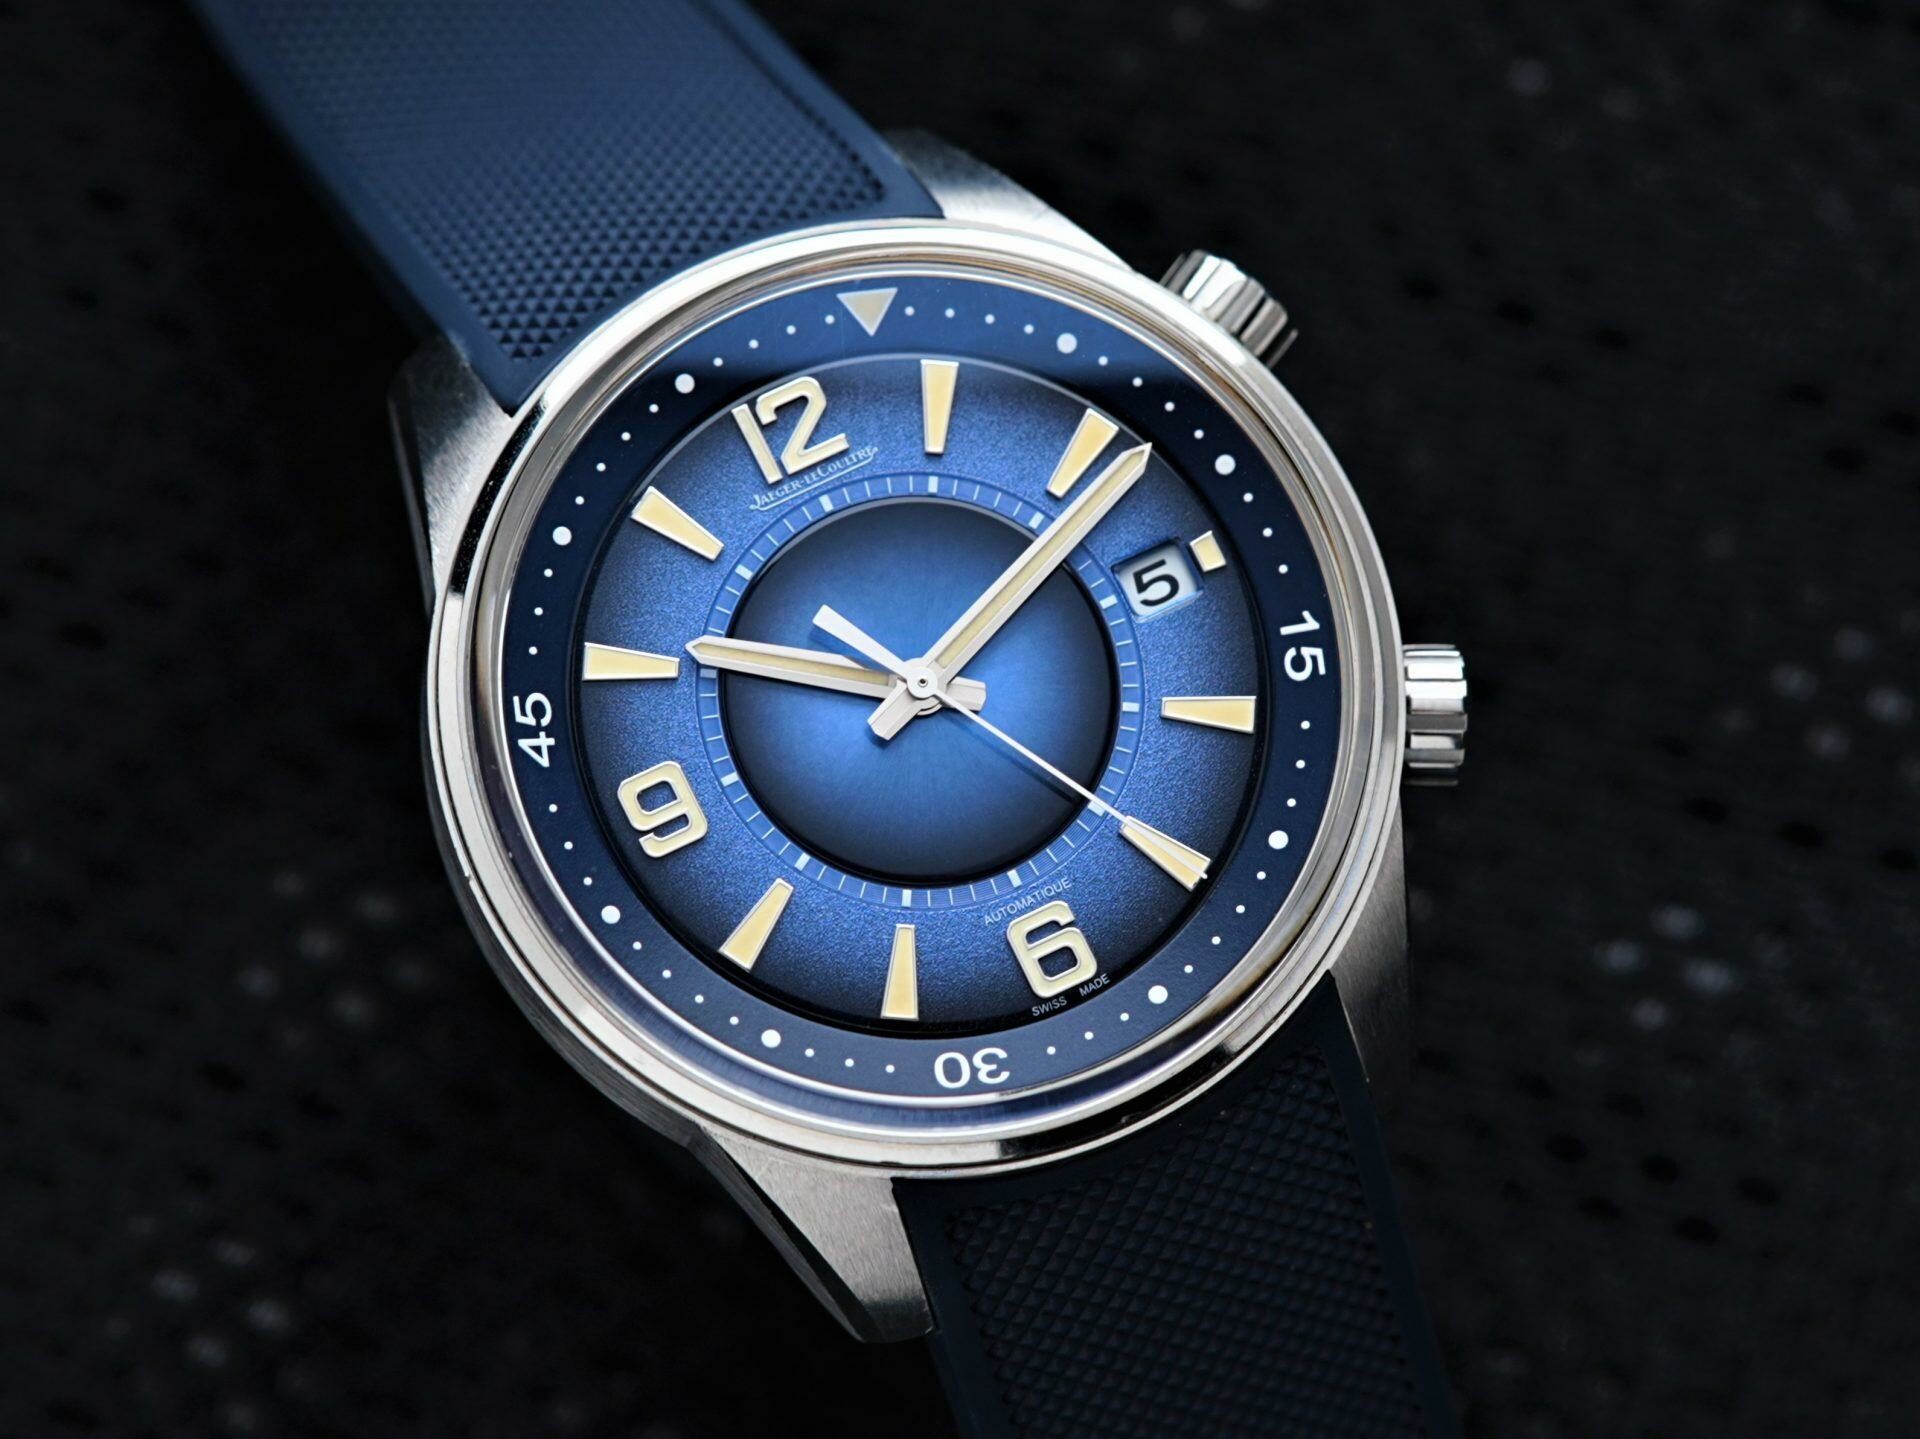 Jaeger-LeCoultre Polaris Limited Stunning Blue Dial watch featured under white light.